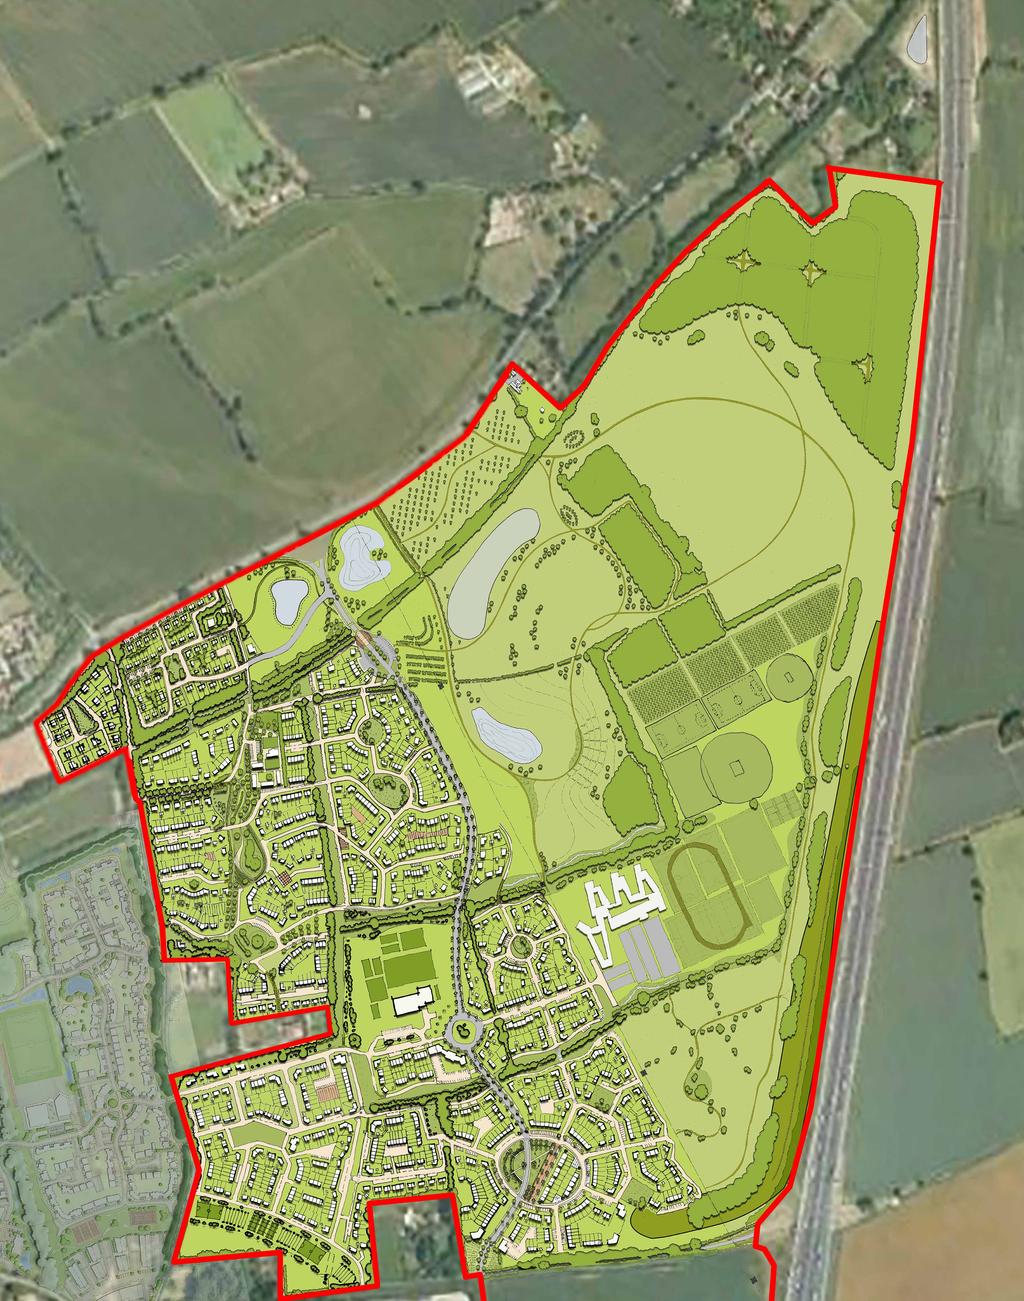 East Hemel Northern Residential Area The proposed Northern Residential Area will comprise up to 1,500 new homes, including 40% affordable housing.